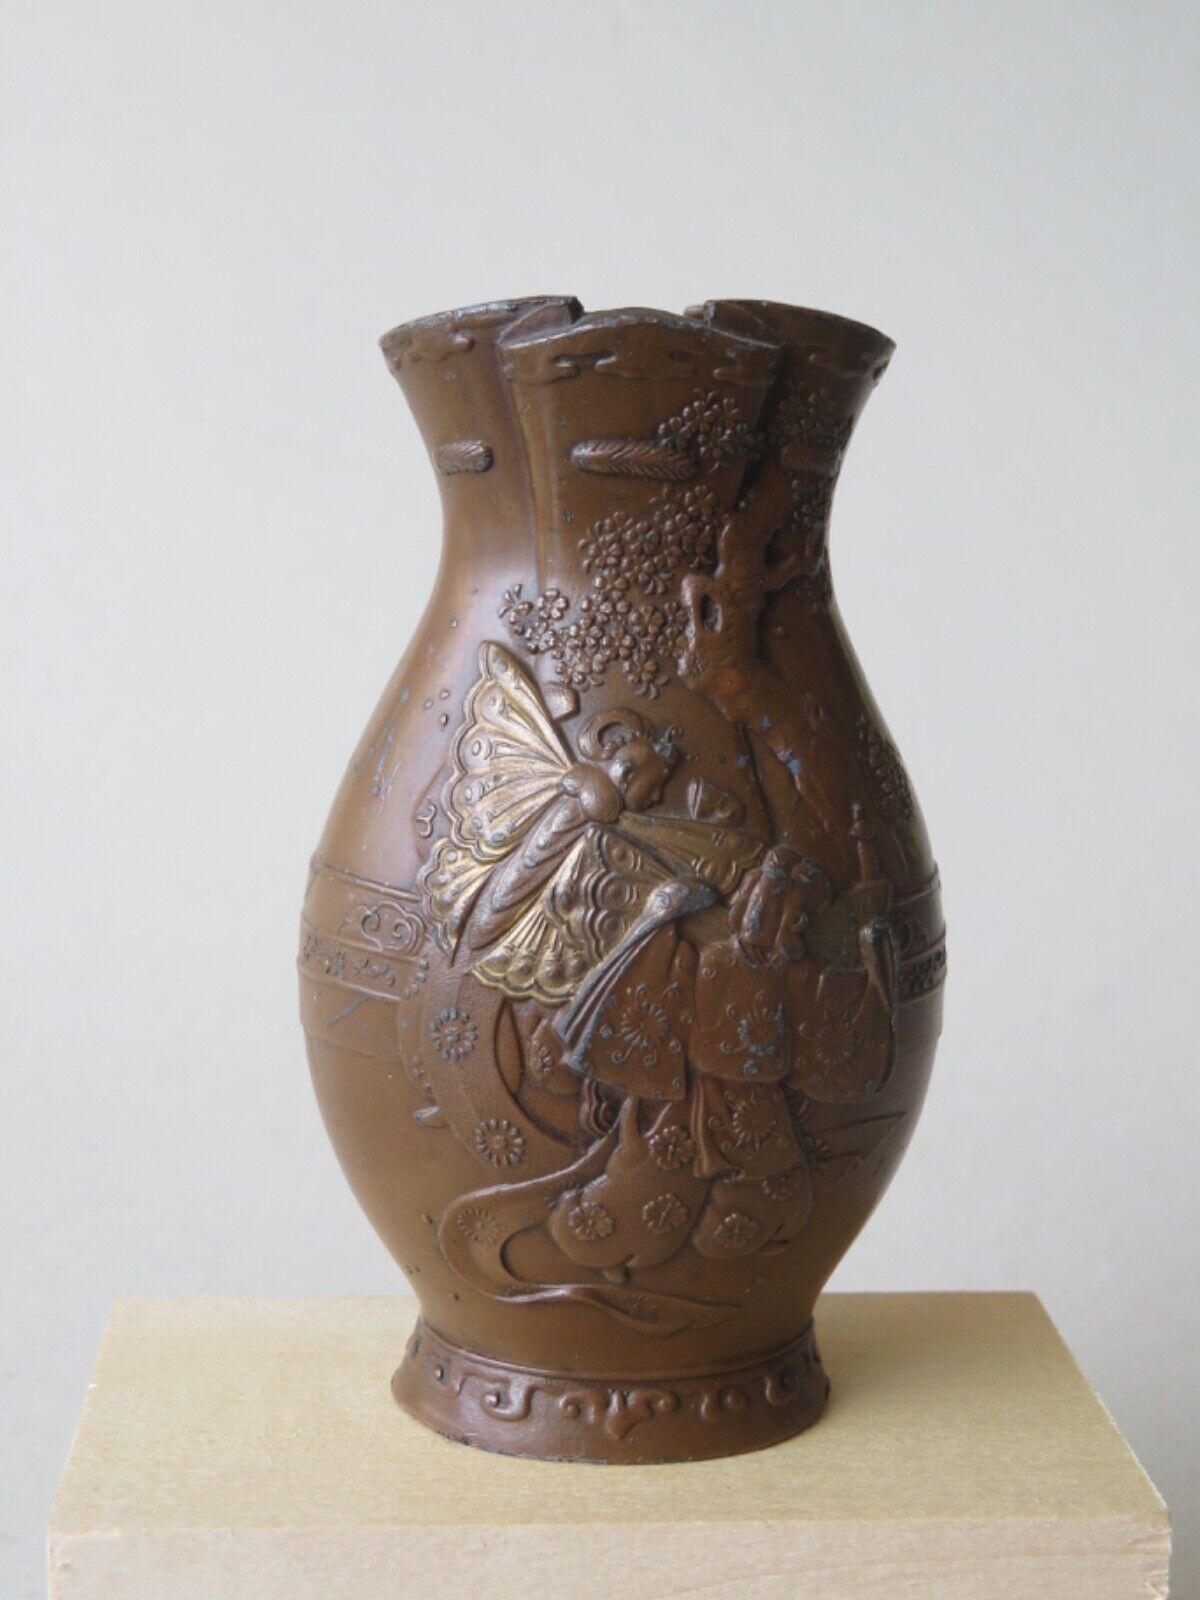 OLD JAPANESE METAL VASE WITH EMBOSSED FIGUES IN A FANTASY SETTING